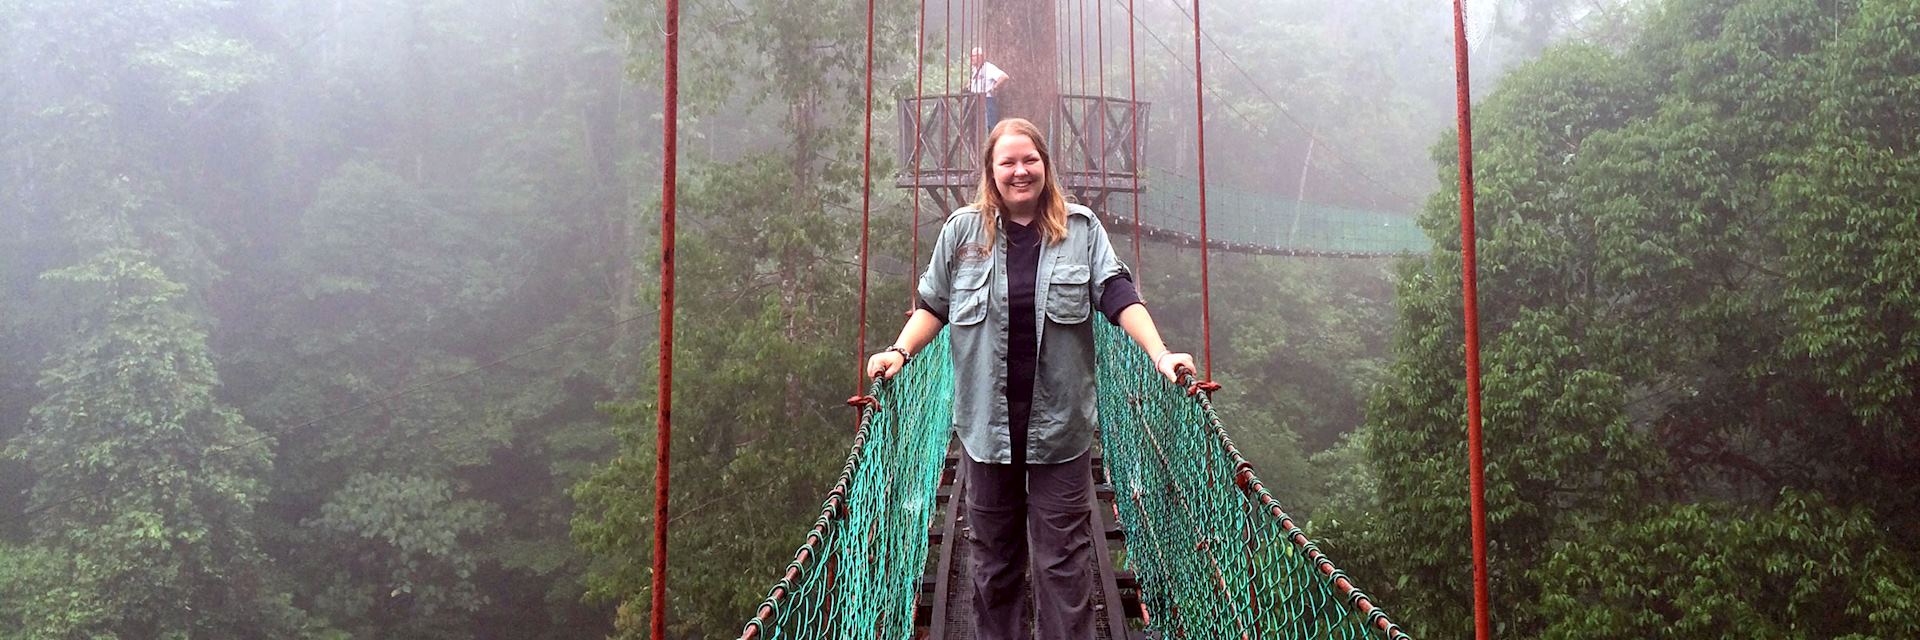 Sophie on a canopy walkway at Borneo Rainforest Lodge, Danum Valley, Borneo